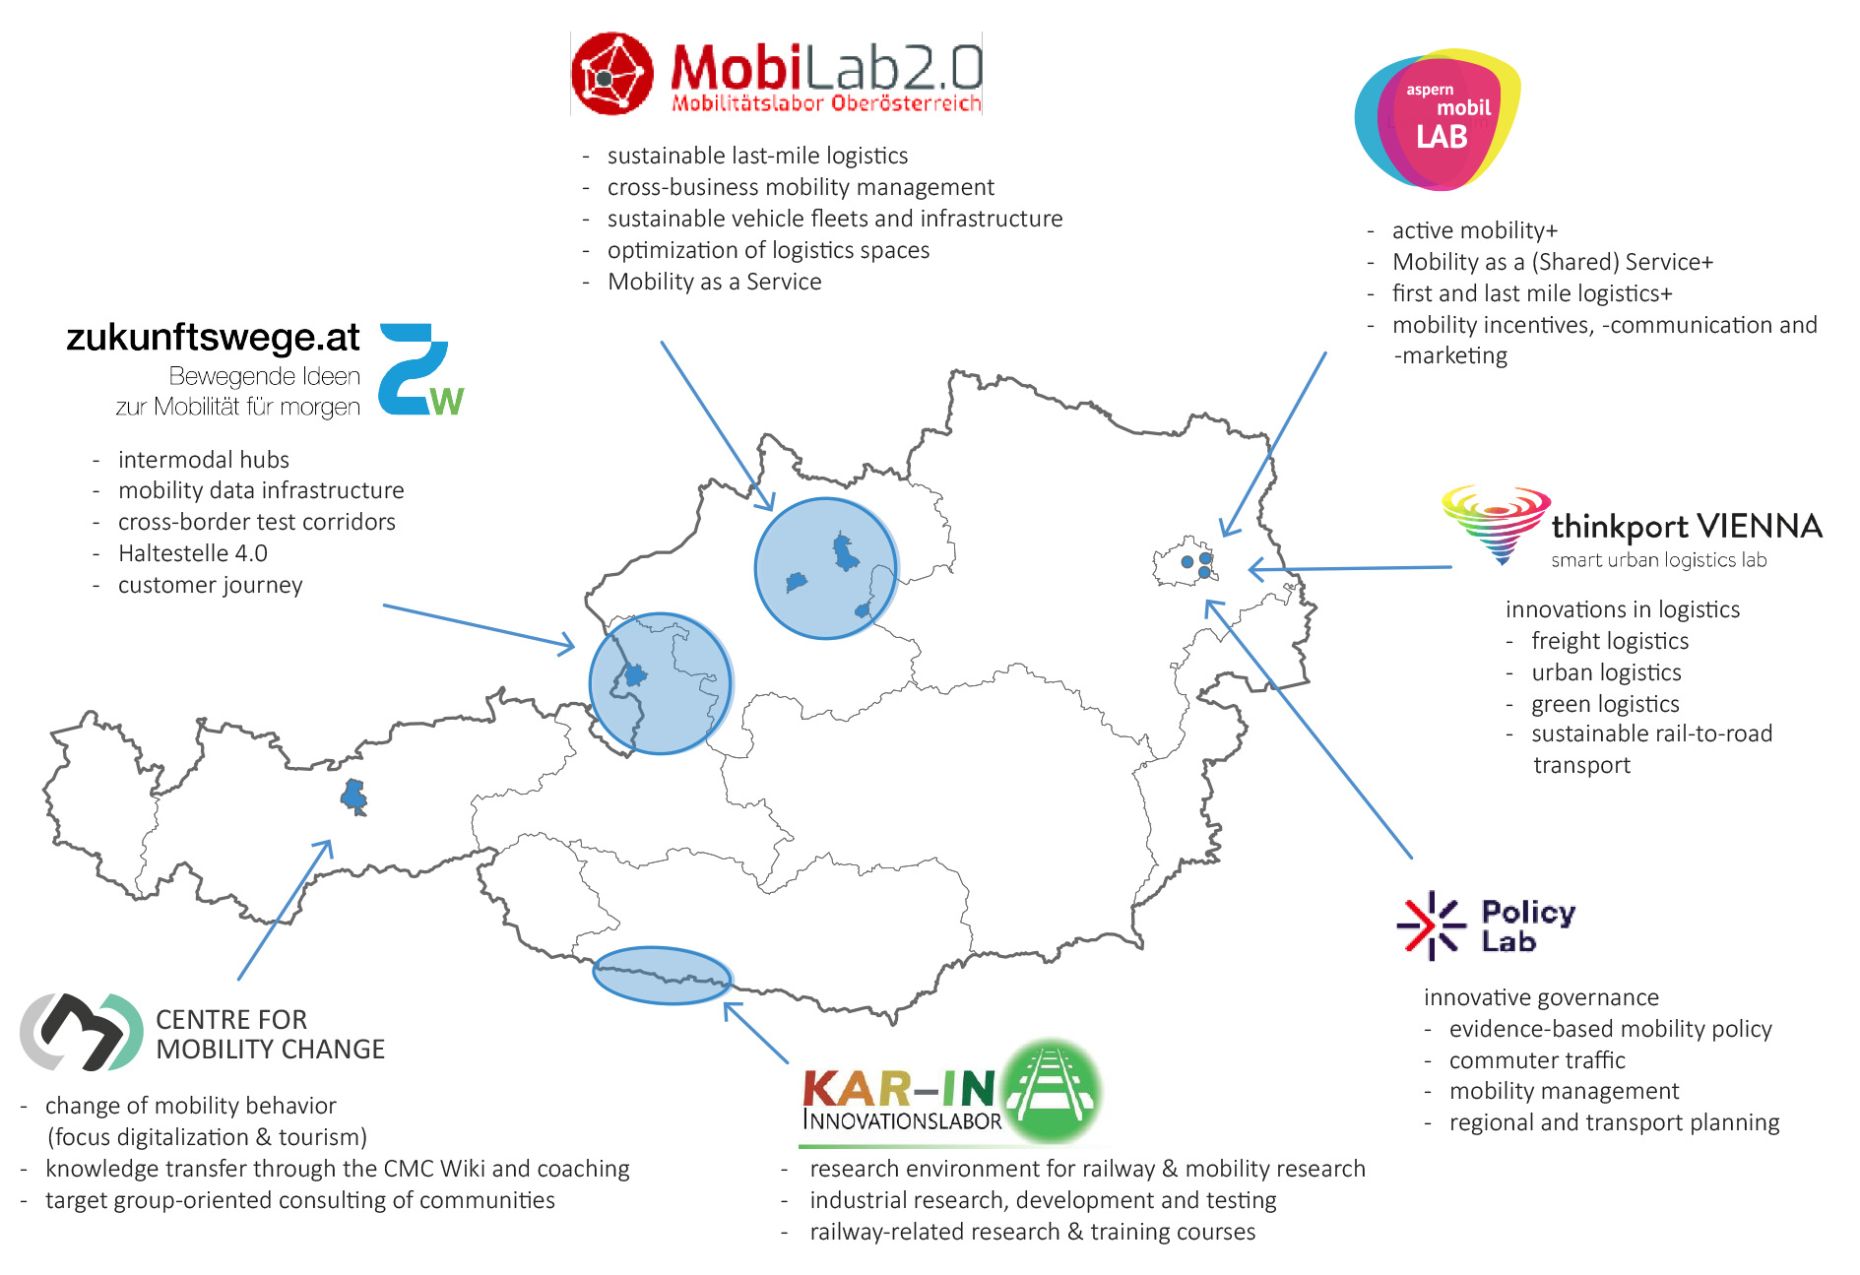 The image shows a map of Austria in which the mobility labs, the Center for Mobility Change and the Policy-Lab.at are located. The main topics of the individual mobility labs are also shown.